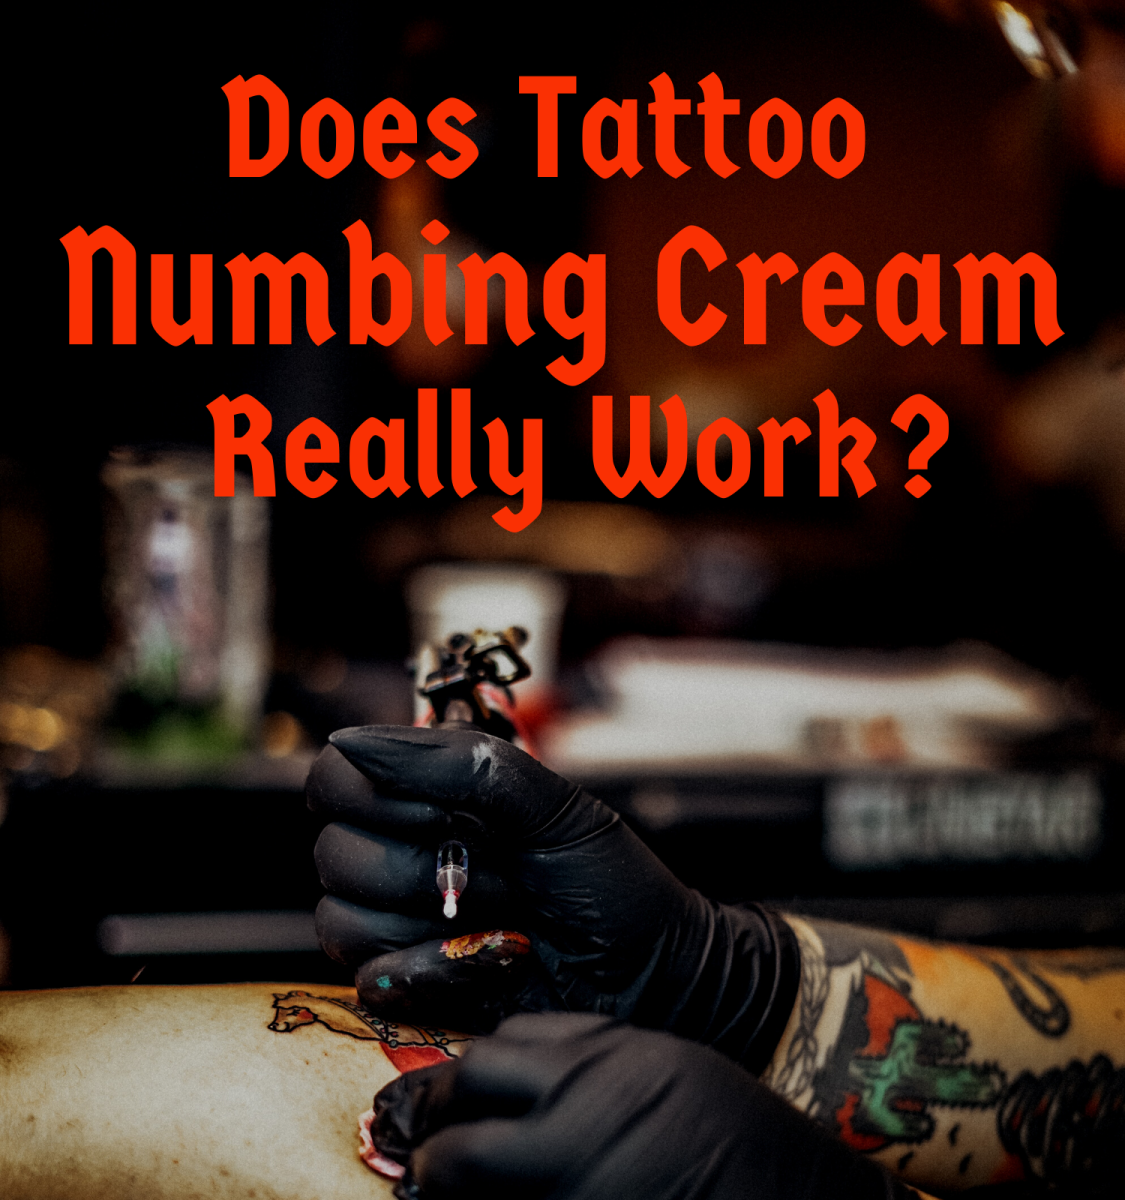 Do tattoo numbing creams work, and if so, how?